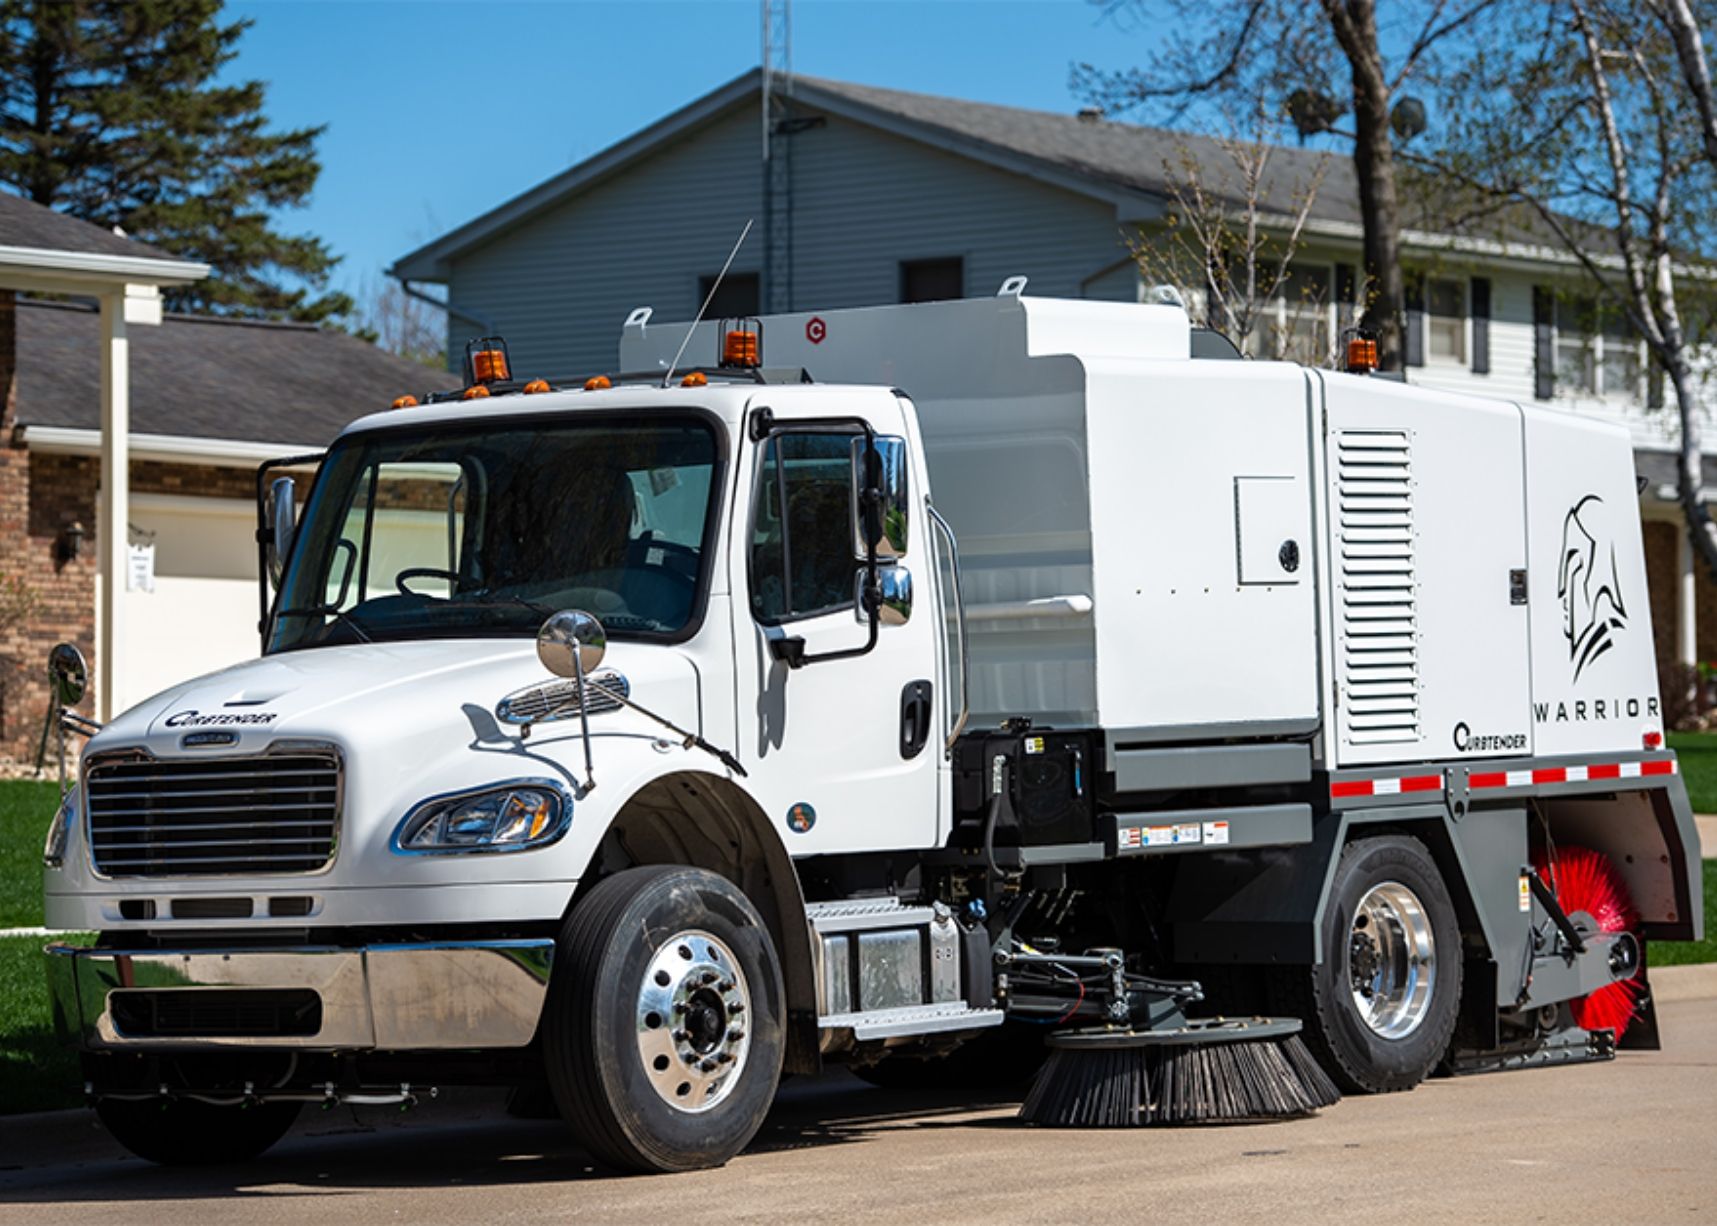 Curbtender Sweepers Awarded Sourcewell Contract